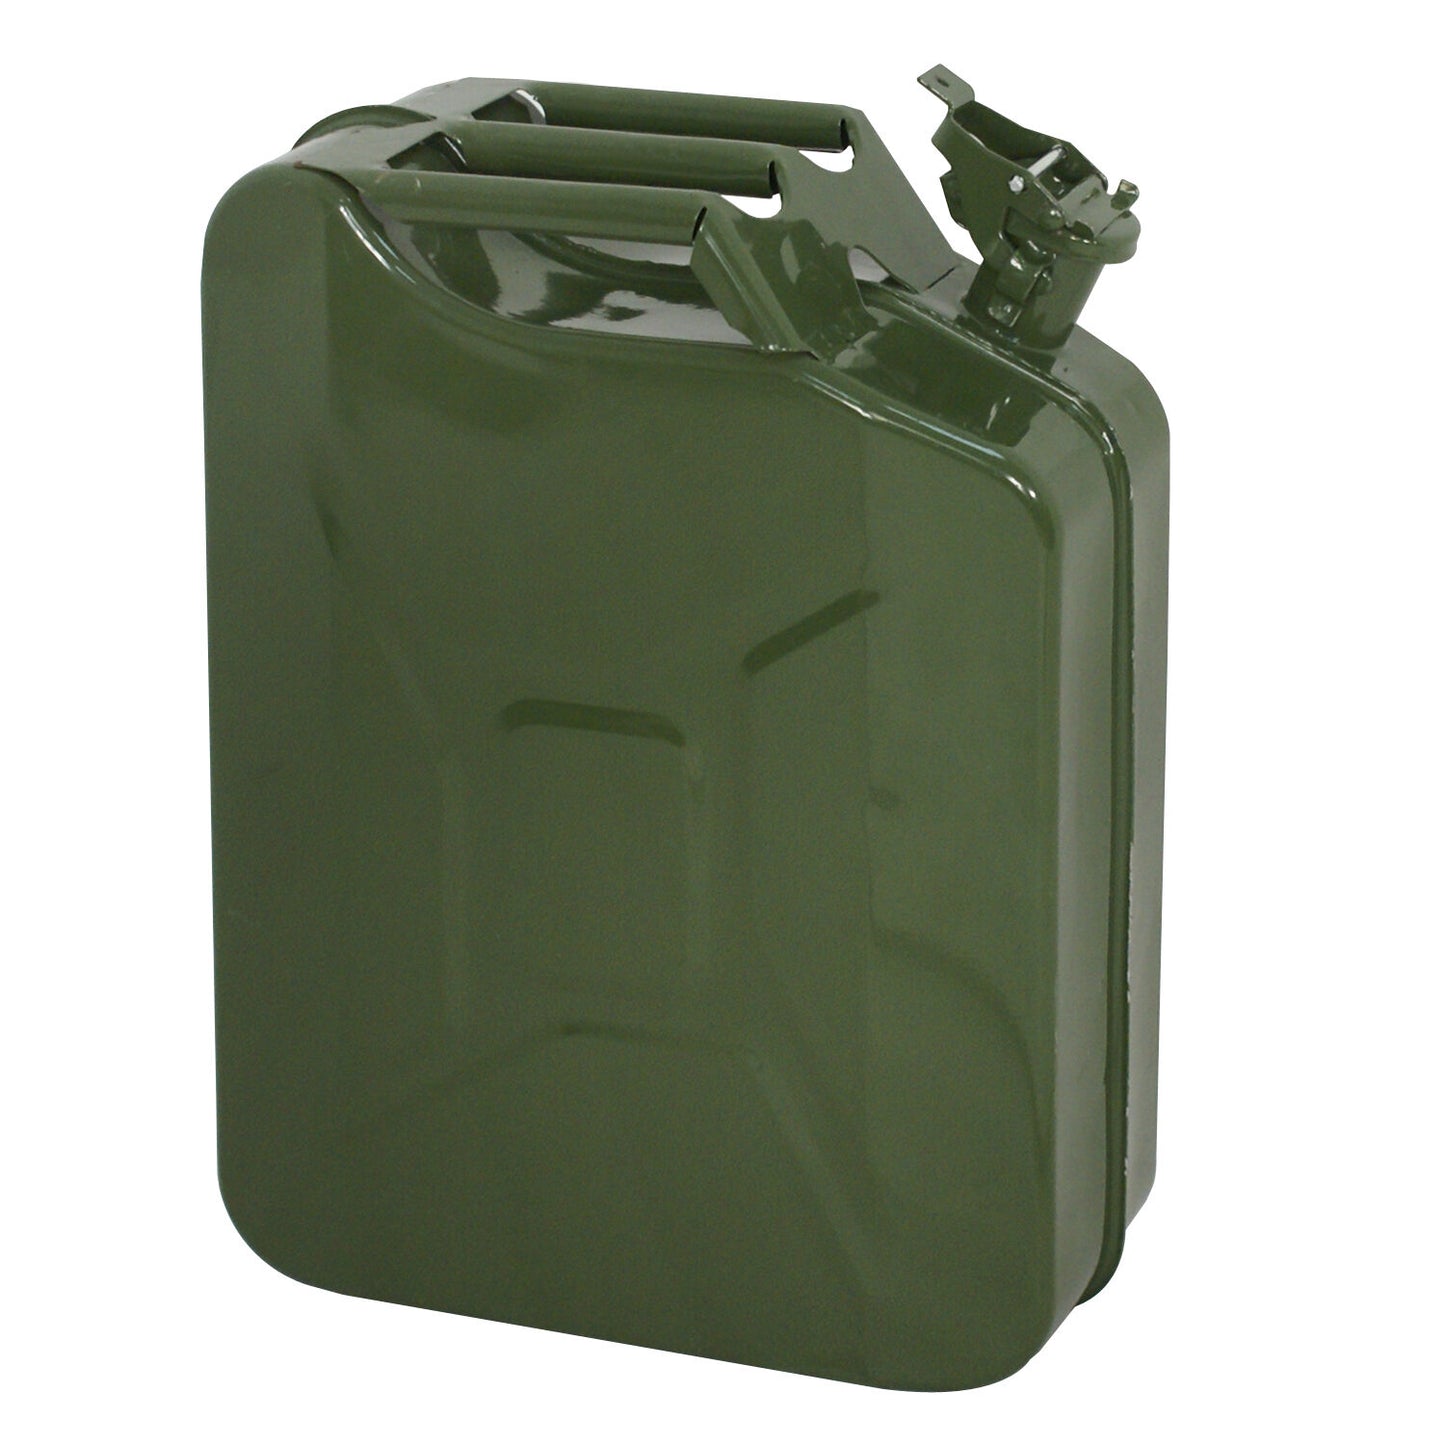 5X 5Gal 20L Army Backup Jerry Can Gasoline Can Metal Tank Emergency Backup Green